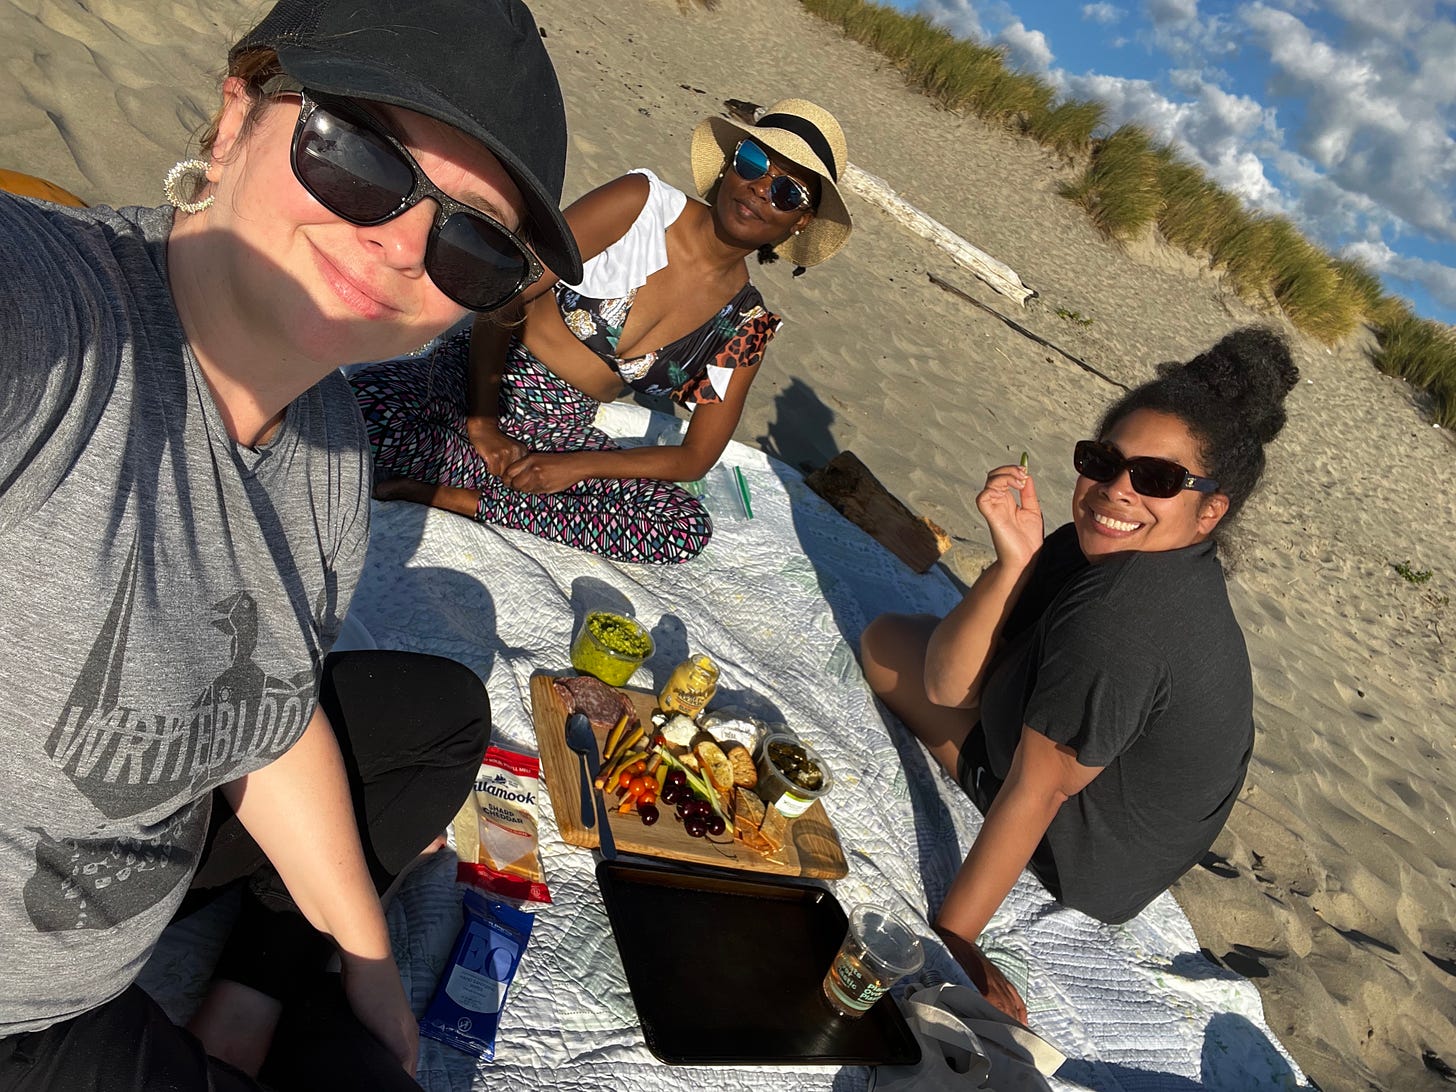 Amber, Nafissa, and Jackie sit on a blanket on the beach with a charcuterie board spread in front of them. Amber takes a group selfie of the three of them.